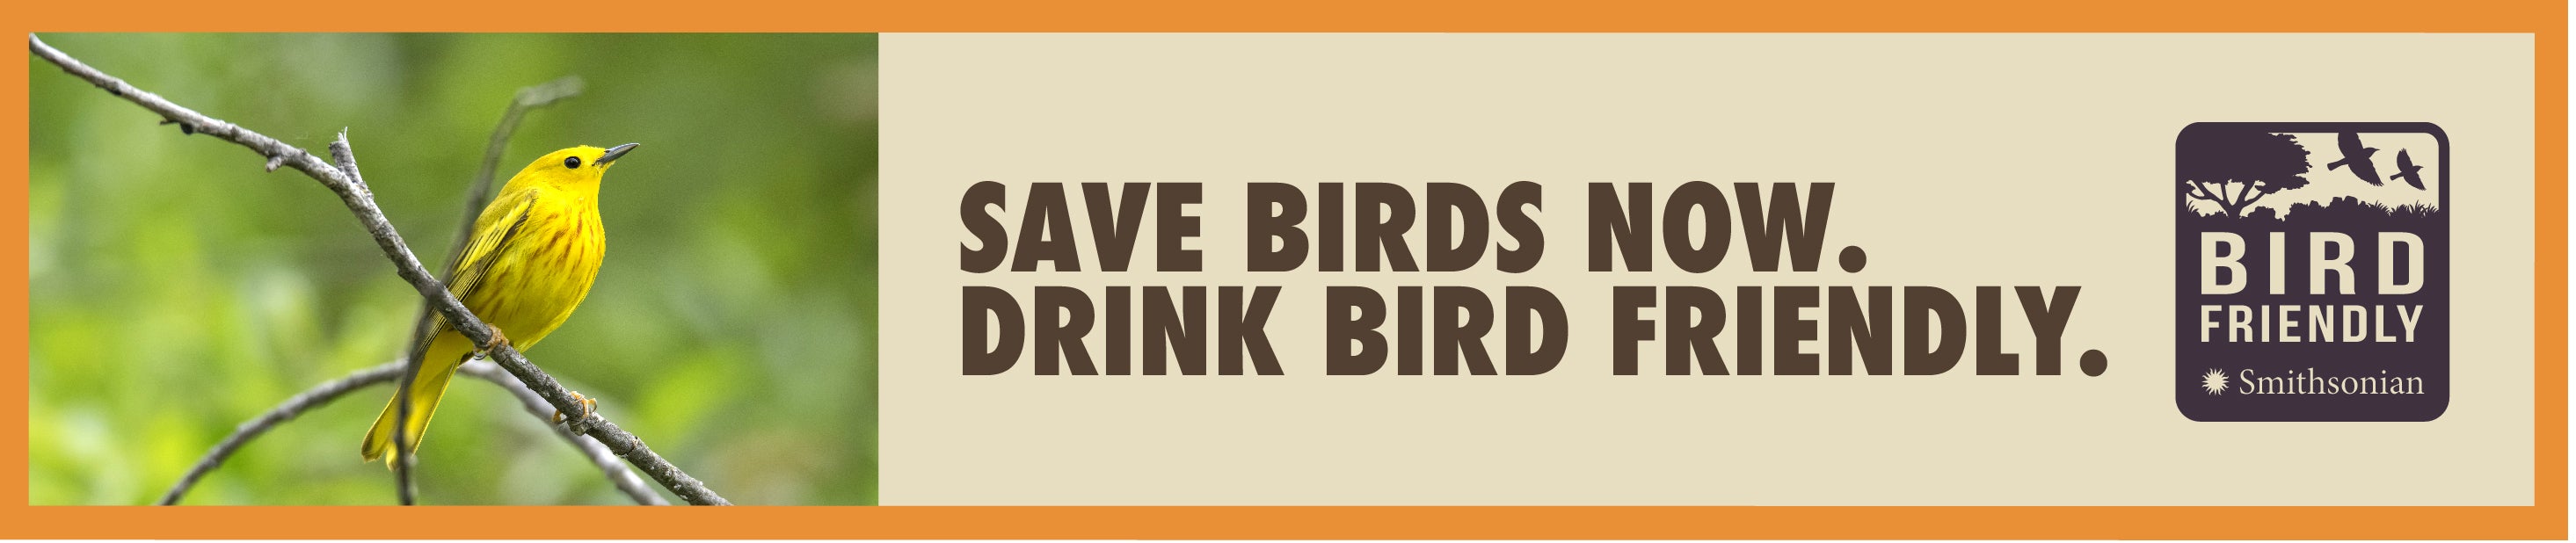 A banner with a photo of a yellow bird perched on a branch to the left and the text "Save Birds Now. Drink Bird Friendly." and the Smithsonian Bird Friendly logo to the right